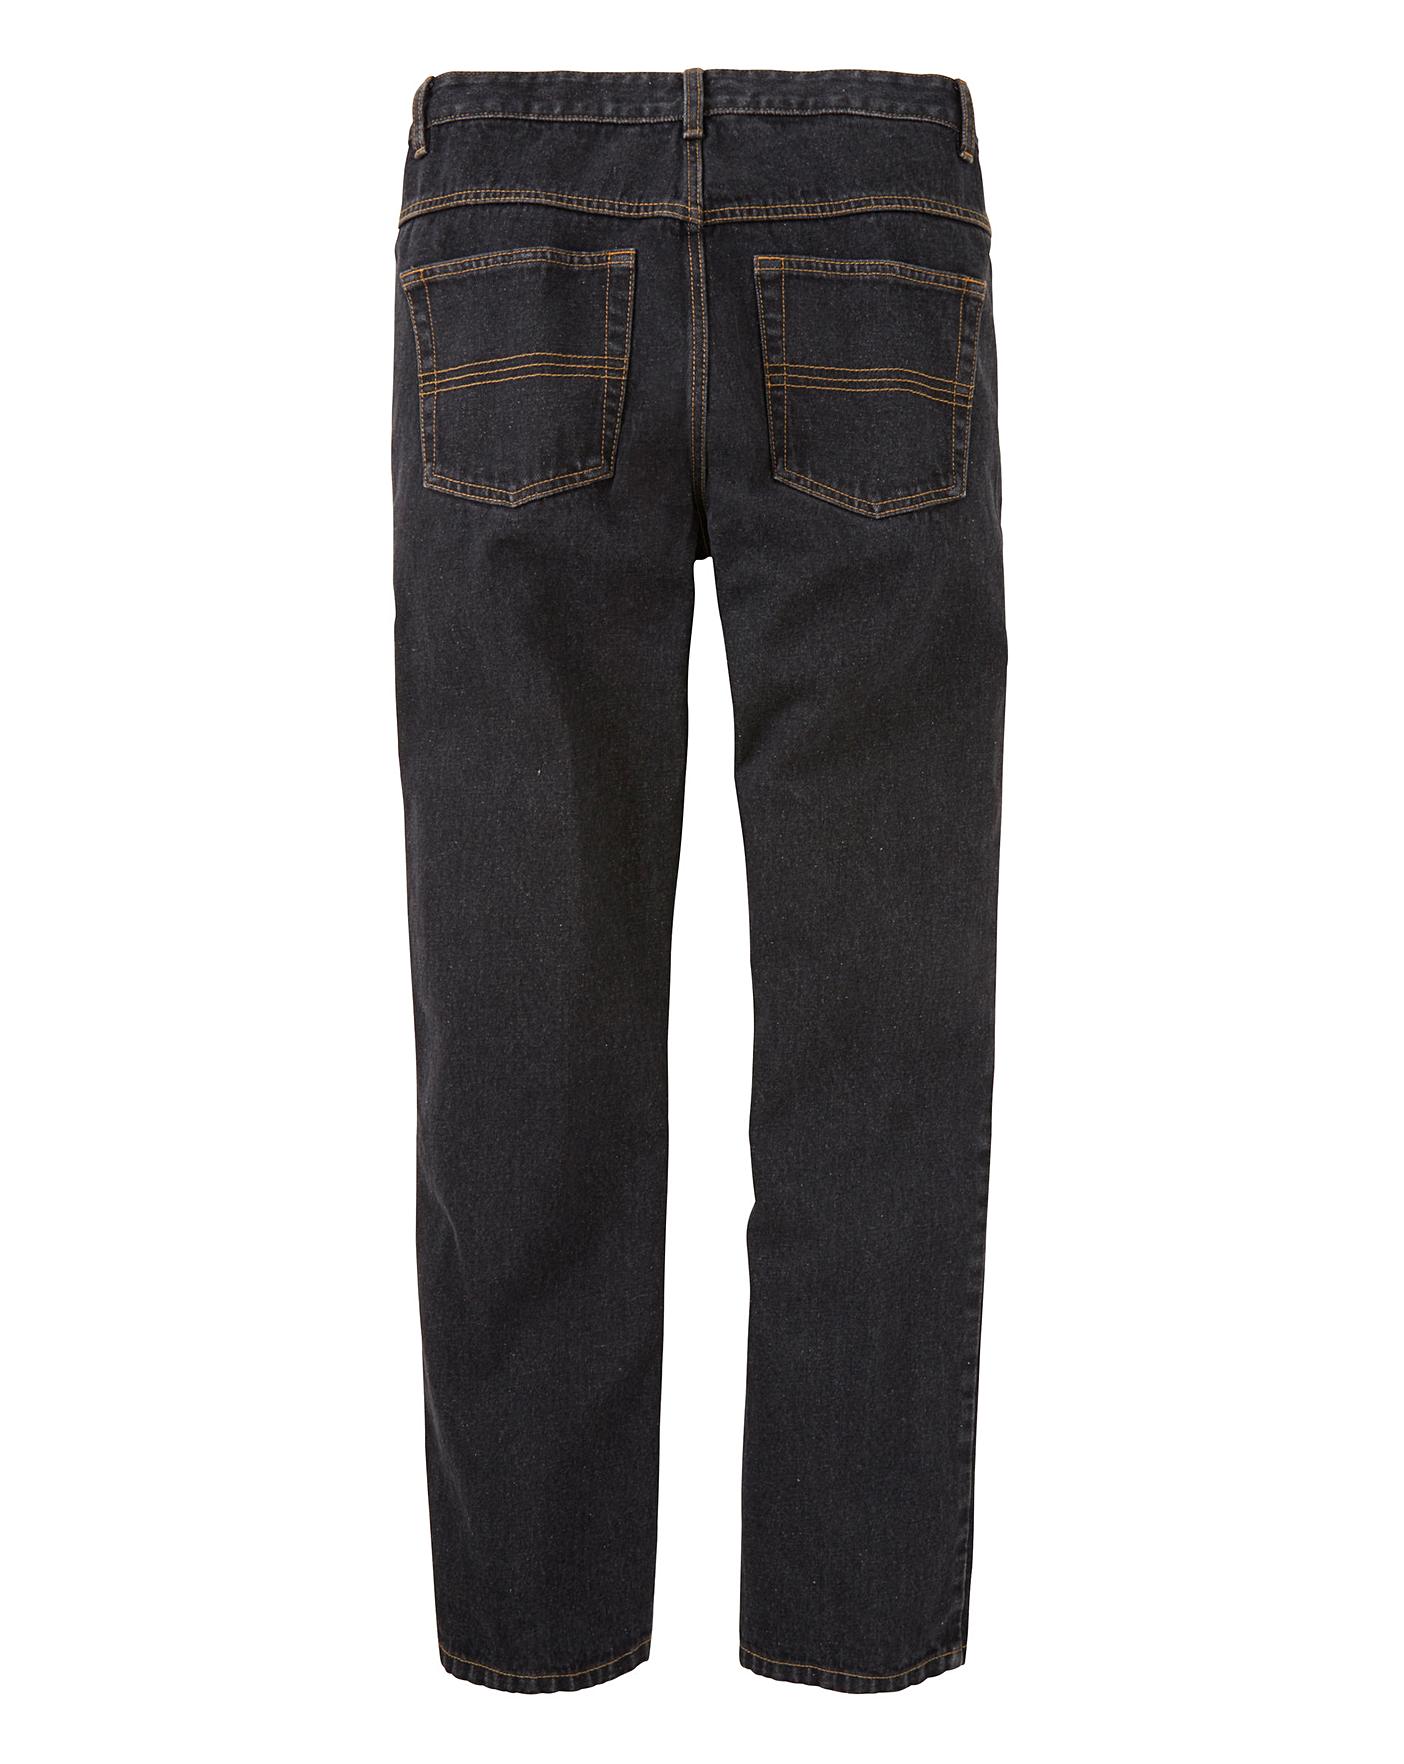 UNION BLUES Denim Jeans 29in | Crazy Clearance